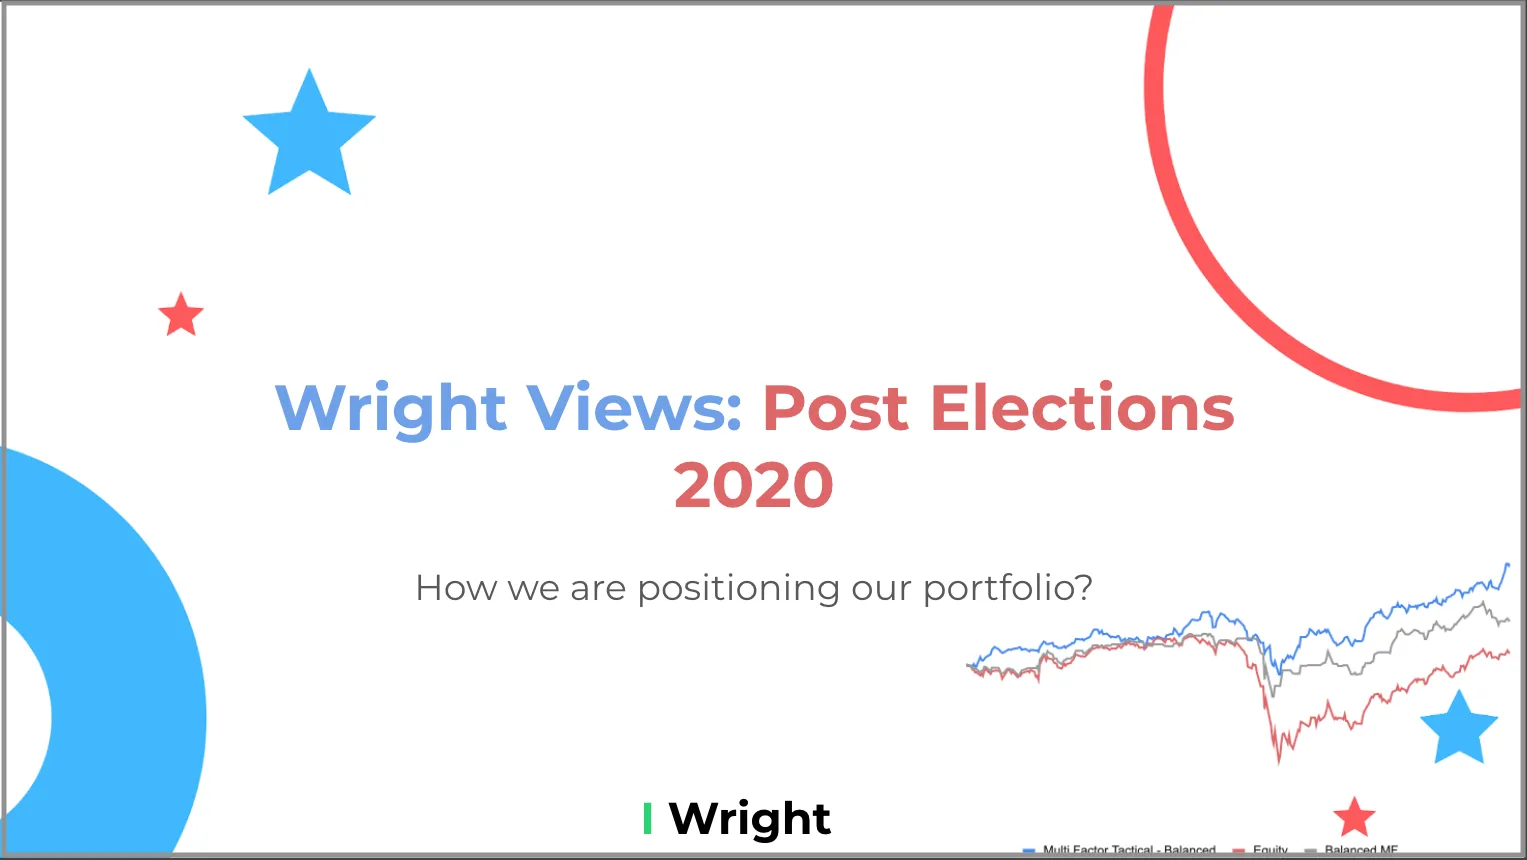 Wright Views: Post Elections 2020